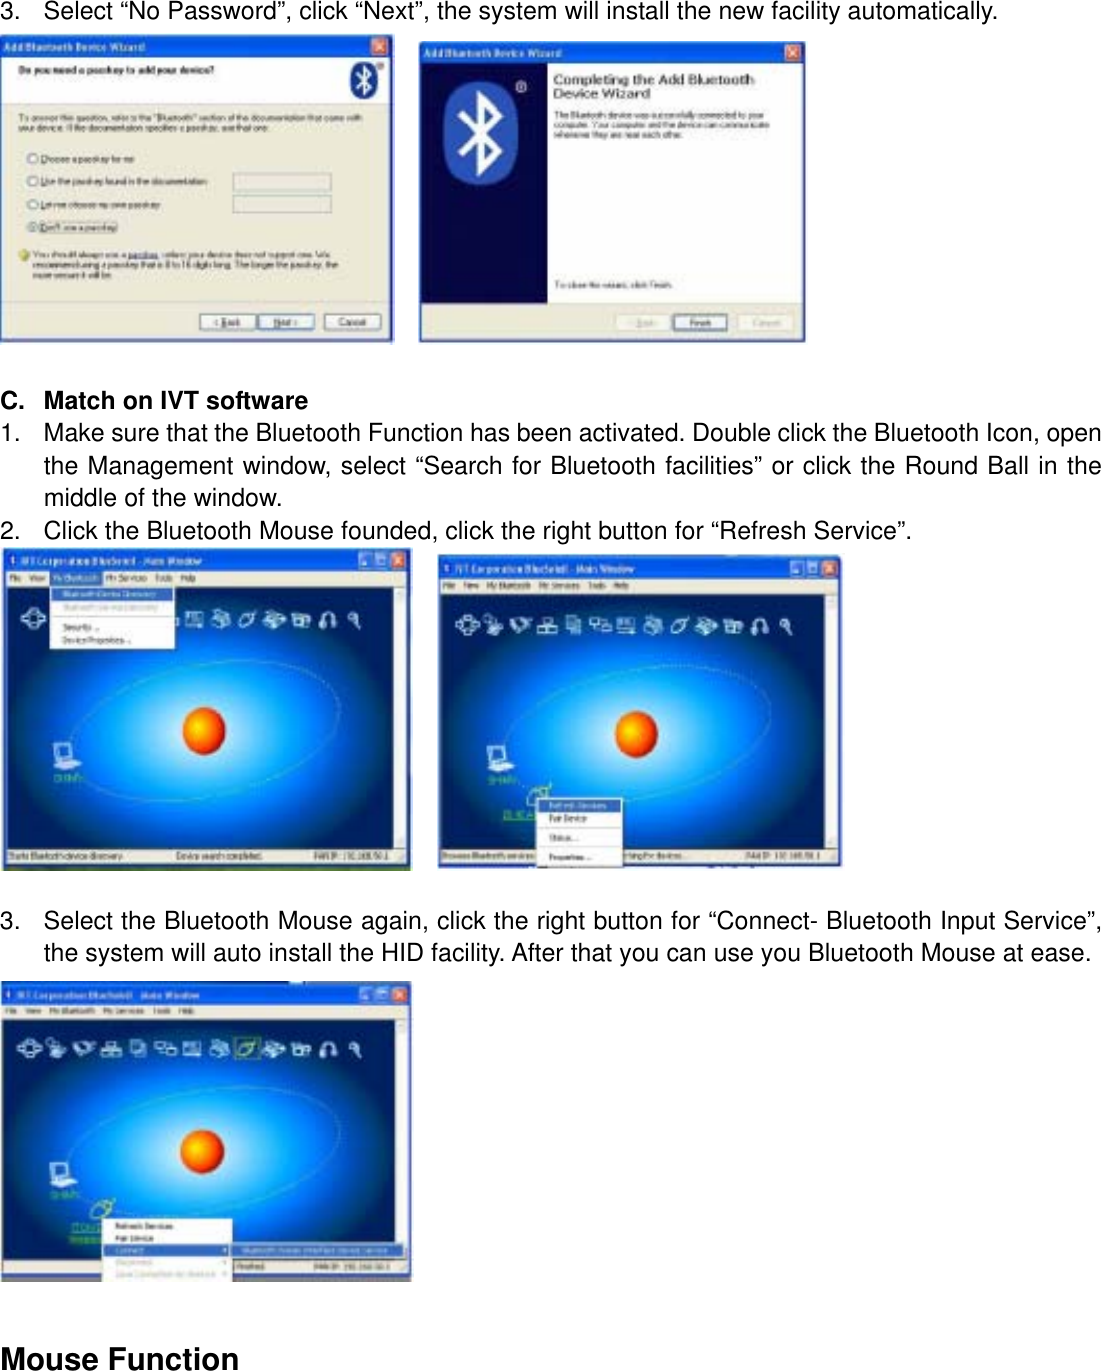 3.  Select “No Password”, click “Next”, the system will install the new facility automatically.      C.  Match on IVT software 1.  Make sure that the Bluetooth Function has been activated. Double click the Bluetooth Icon, open the Management window, select “Search for Bluetooth facilities” or click the Round Ball in the middle of the window. 2.  Click the Bluetooth Mouse founded, click the right button for “Refresh Service”.      3.  Select the Bluetooth Mouse again, click the right button for “Connect- Bluetooth Input Service”, the system will auto install the HID facility. After that you can use you Bluetooth Mouse at ease.   Mouse Function 